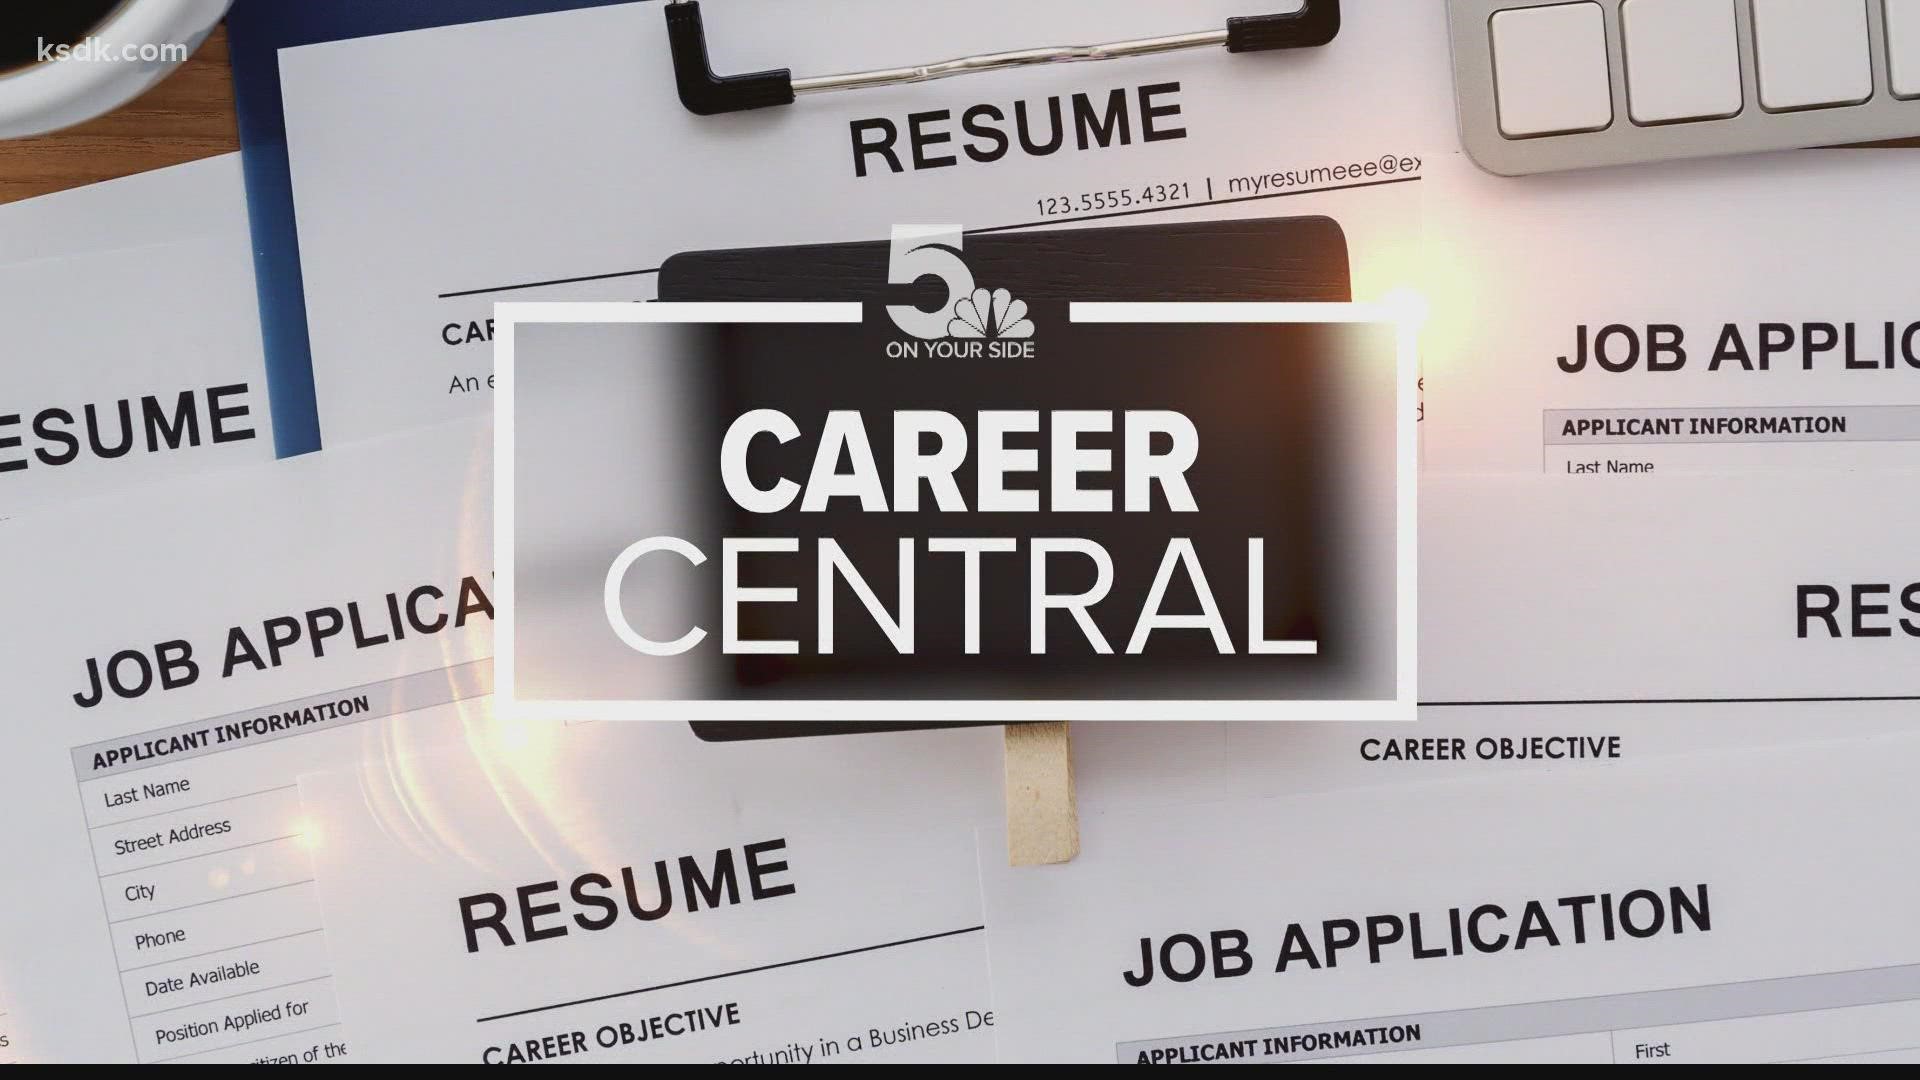 There are also chances to meet face-to-face with local recruiters and hiring managers this week, and  more than 70 jobs up for grabs at Spectrum’s call center.